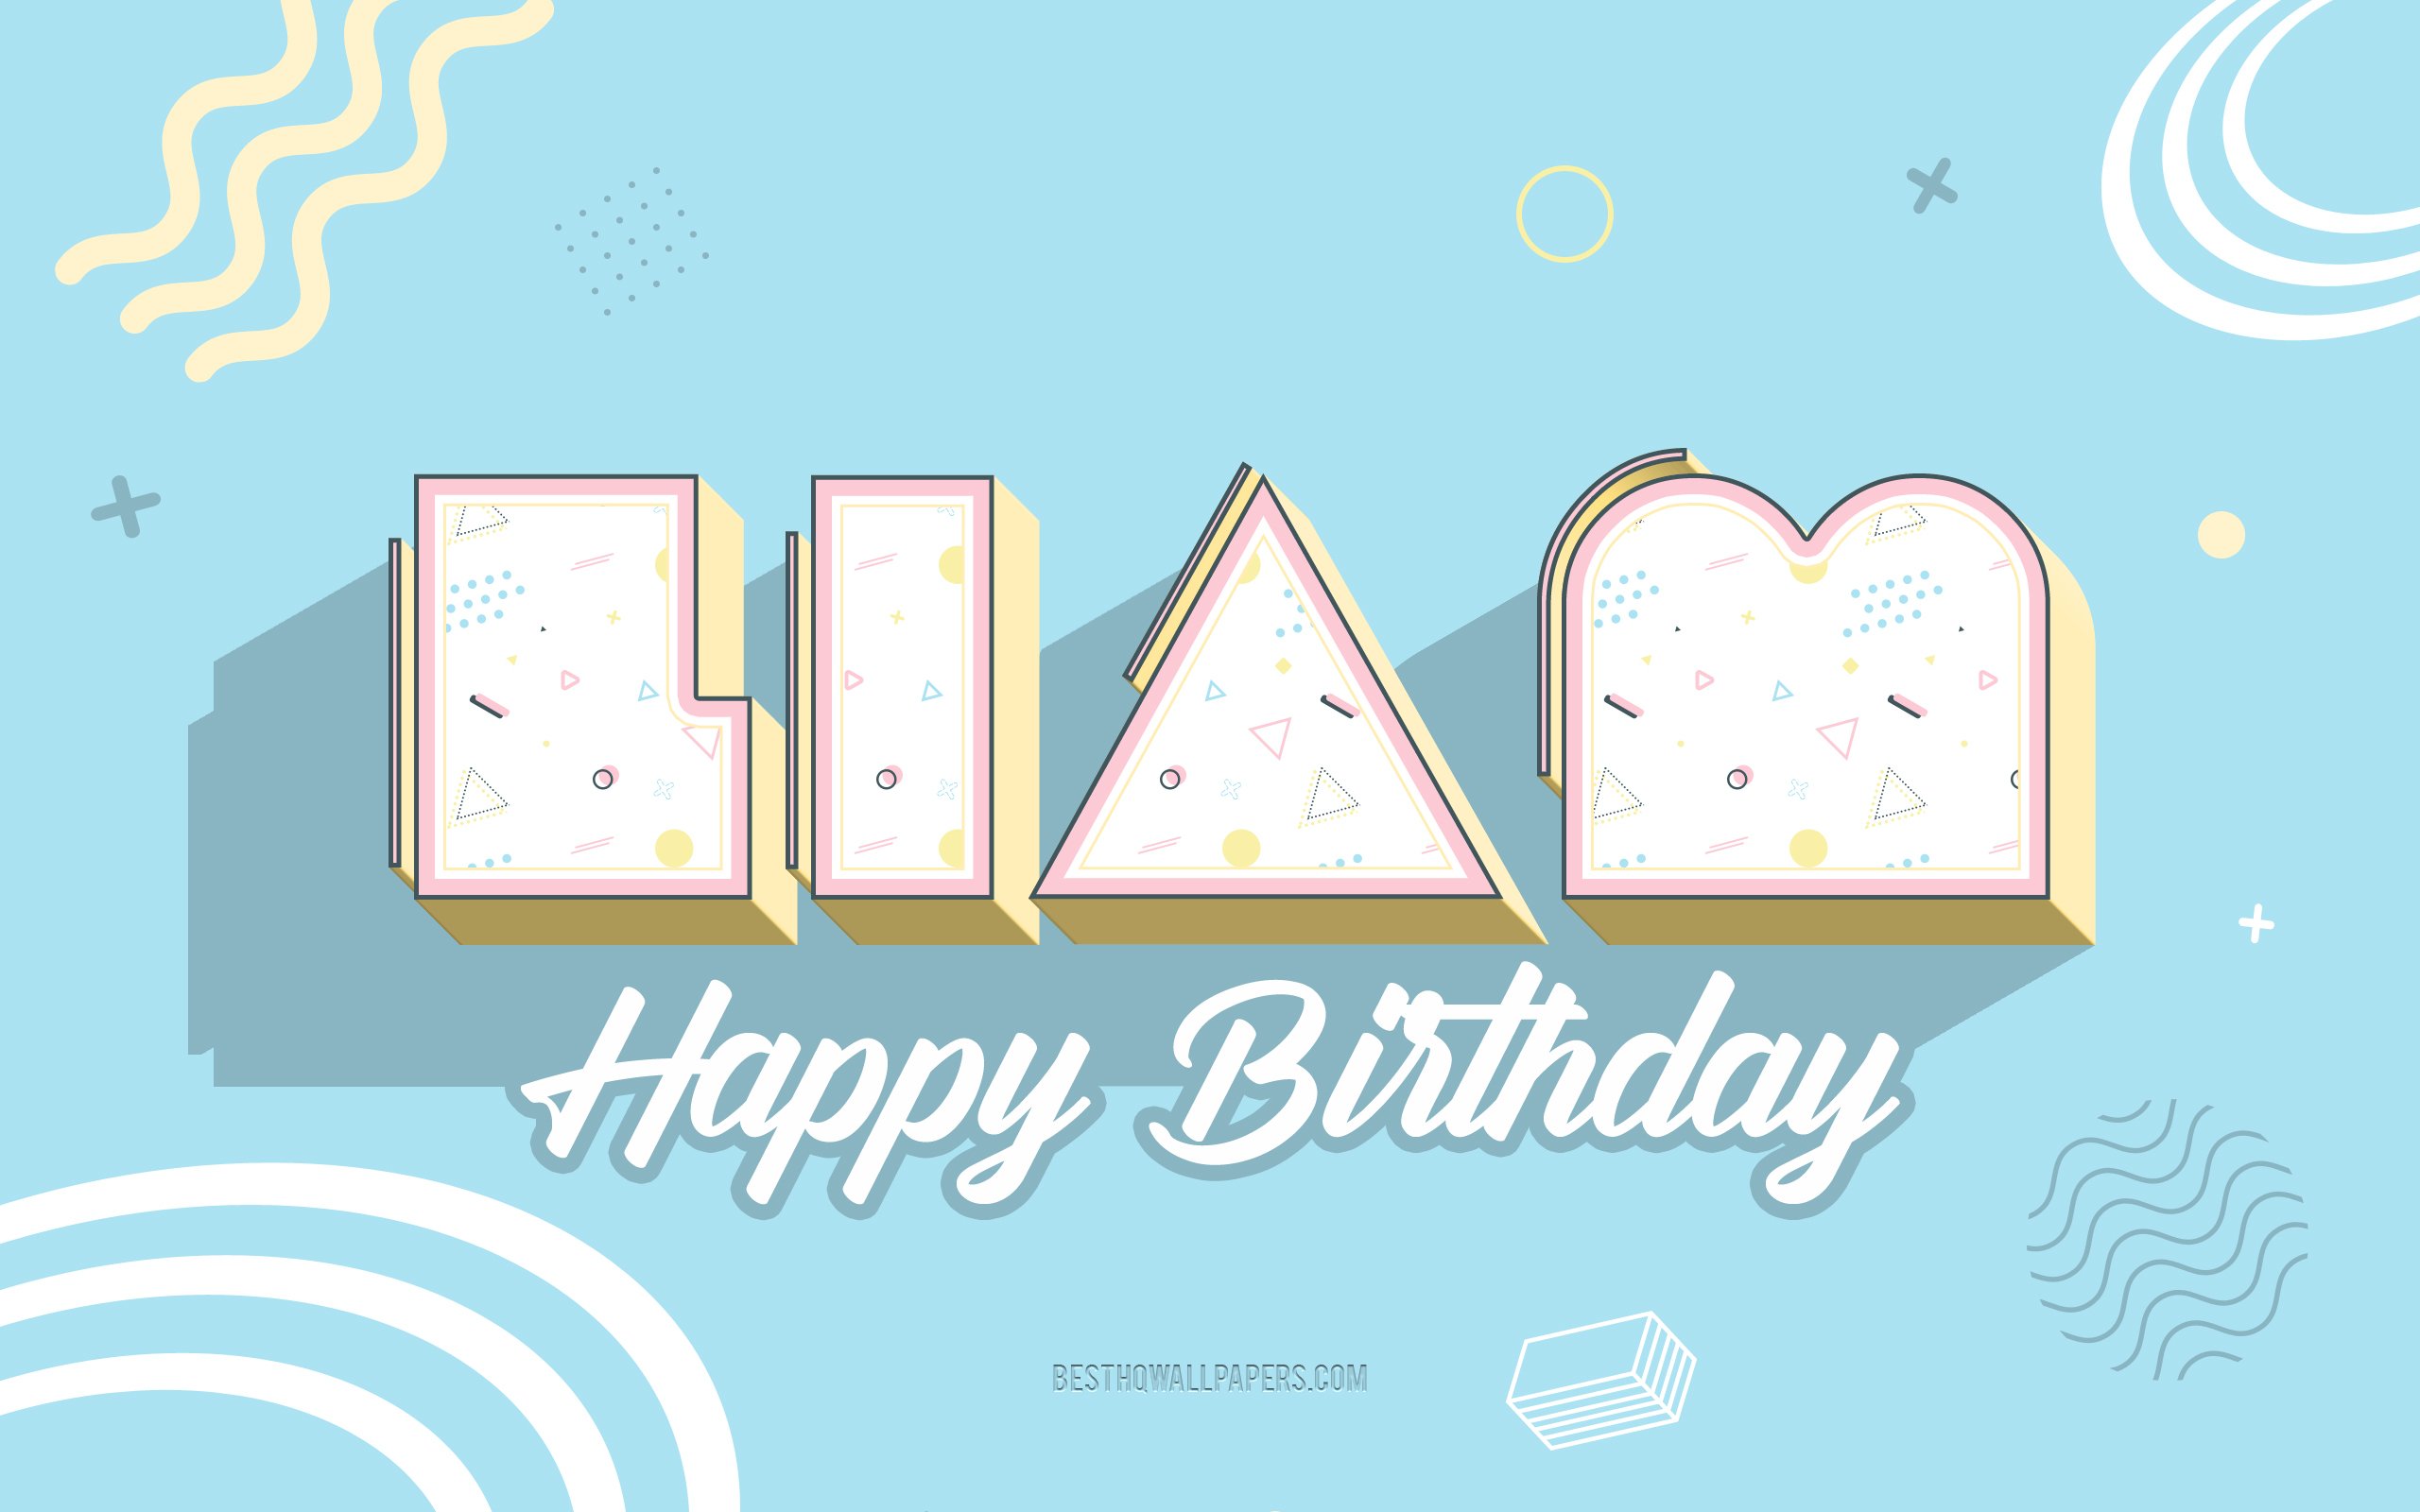 Download wallpaper Happy Birthday Liam, Blue Birthday 3D Background, Liam, Blue Background, Happy Liam birthday, Liam Birthday for desktop with resolution 2560x1600. High Quality HD picture wallpaper